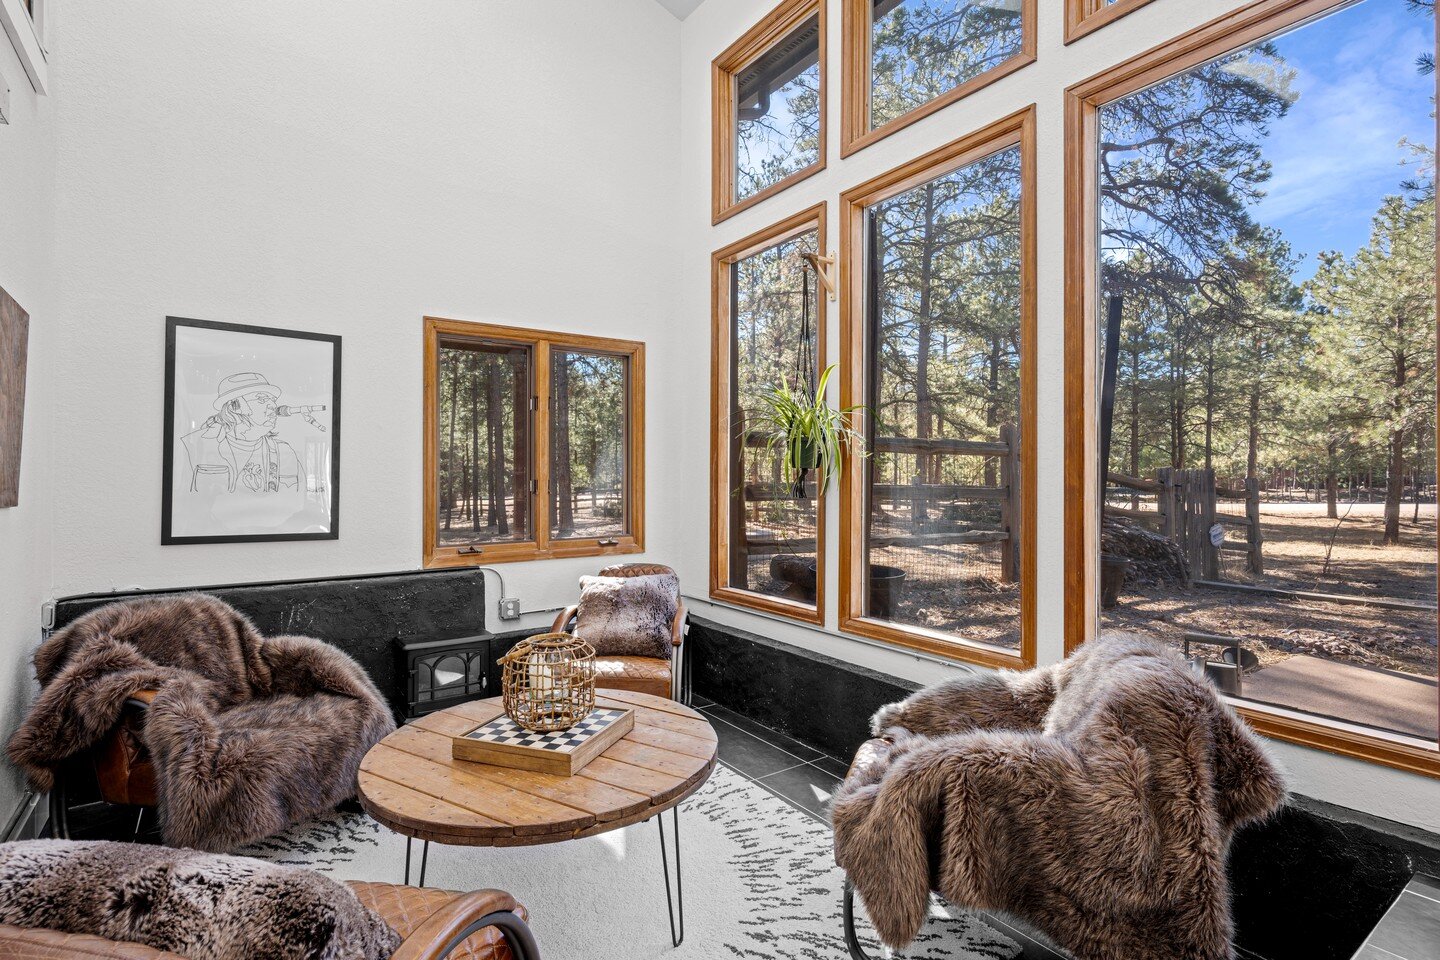 Gorgeous home nestled in the trees

#luxuryhomes #luxuryrealestate #realestatephotography #realestatephotographer #coloradorealestate